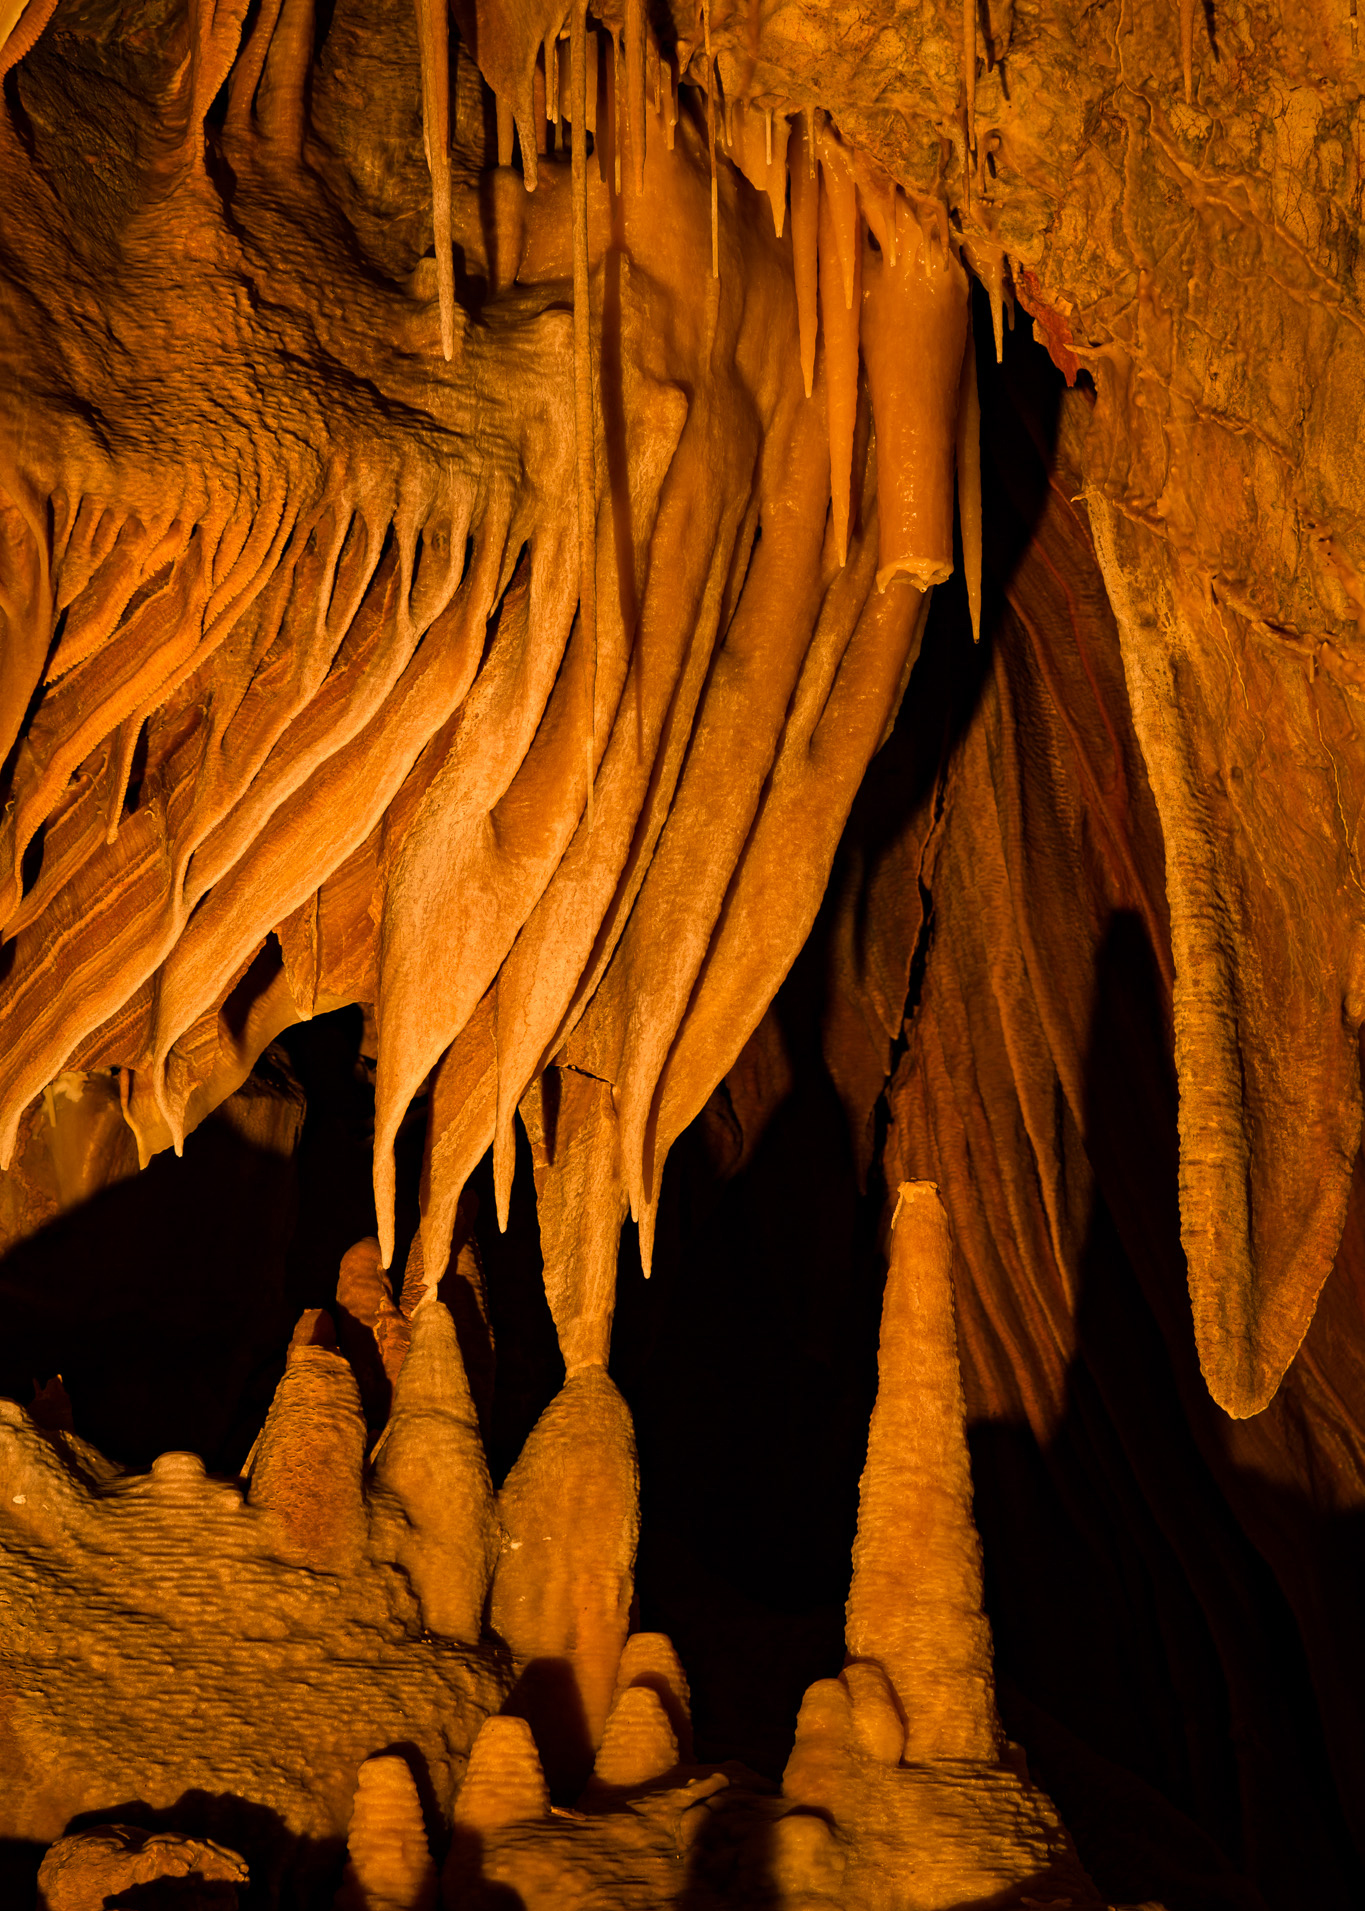 A few “soda straws” hang above stalagmites in Kartchner Caverns. The formations on the left are often referred to as “bacon” due to their appearance. Photo by Robert Shea.